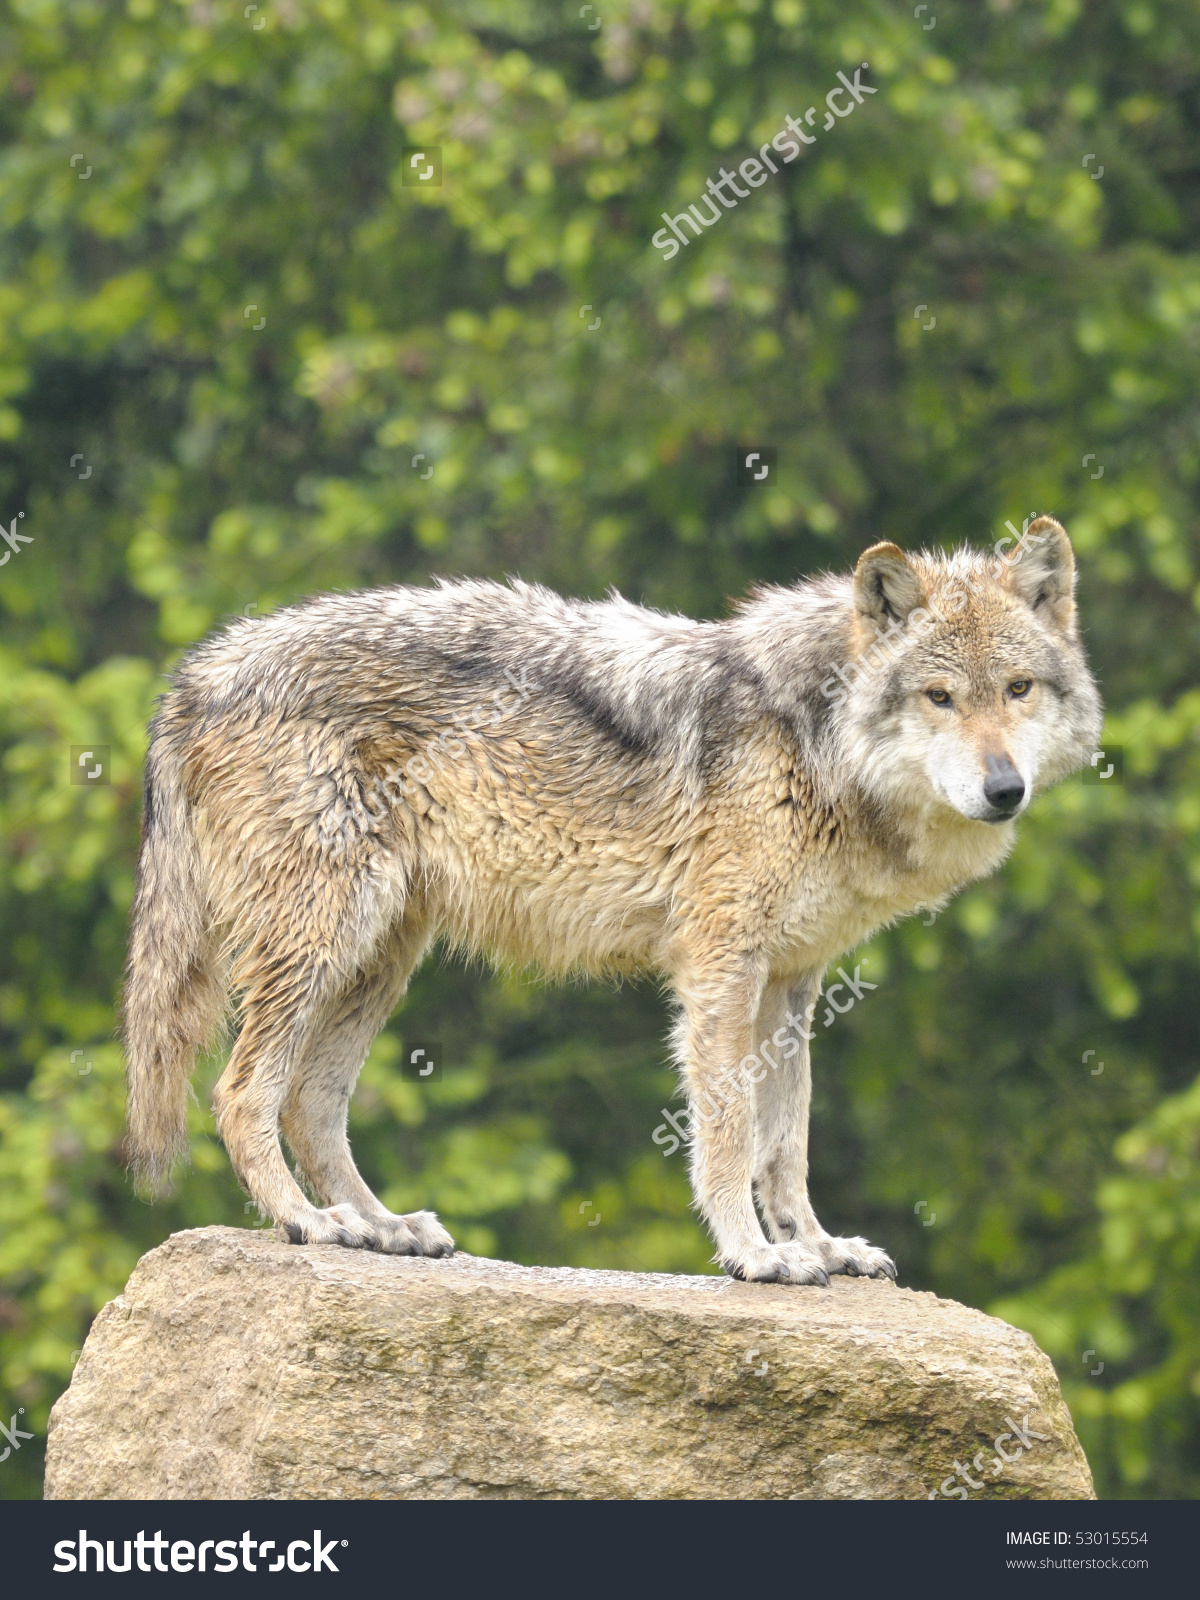 Mexican Gray Wolf Canis Lupus Baileyi Stock Photo 53015554.